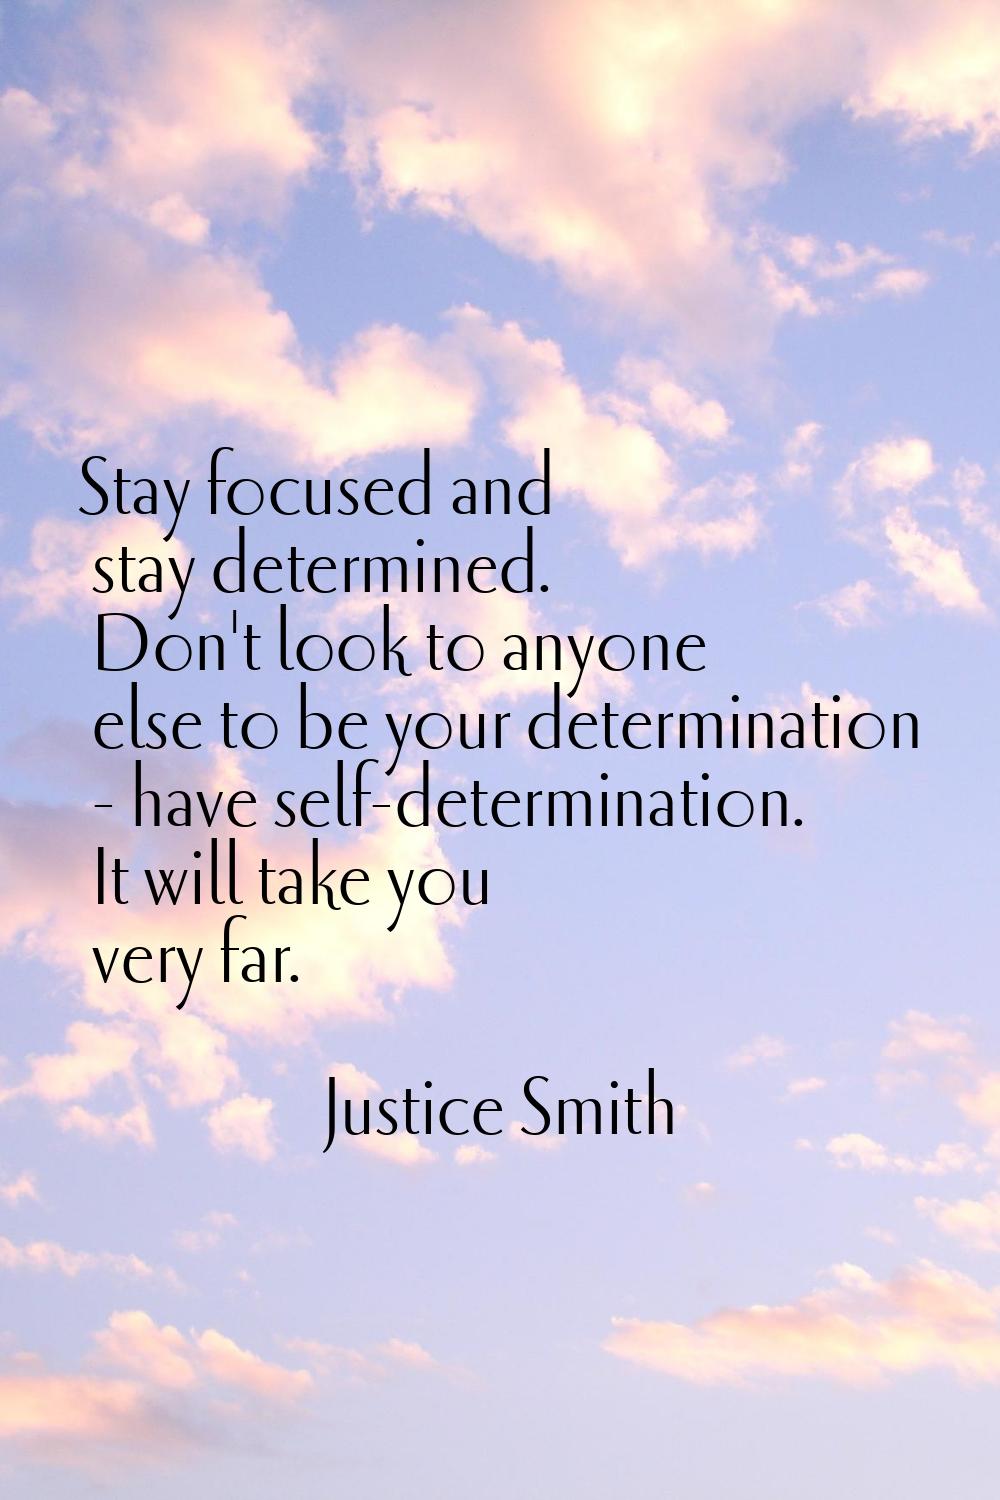 Stay focused and stay determined. Don't look to anyone else to be your determination - have self-de